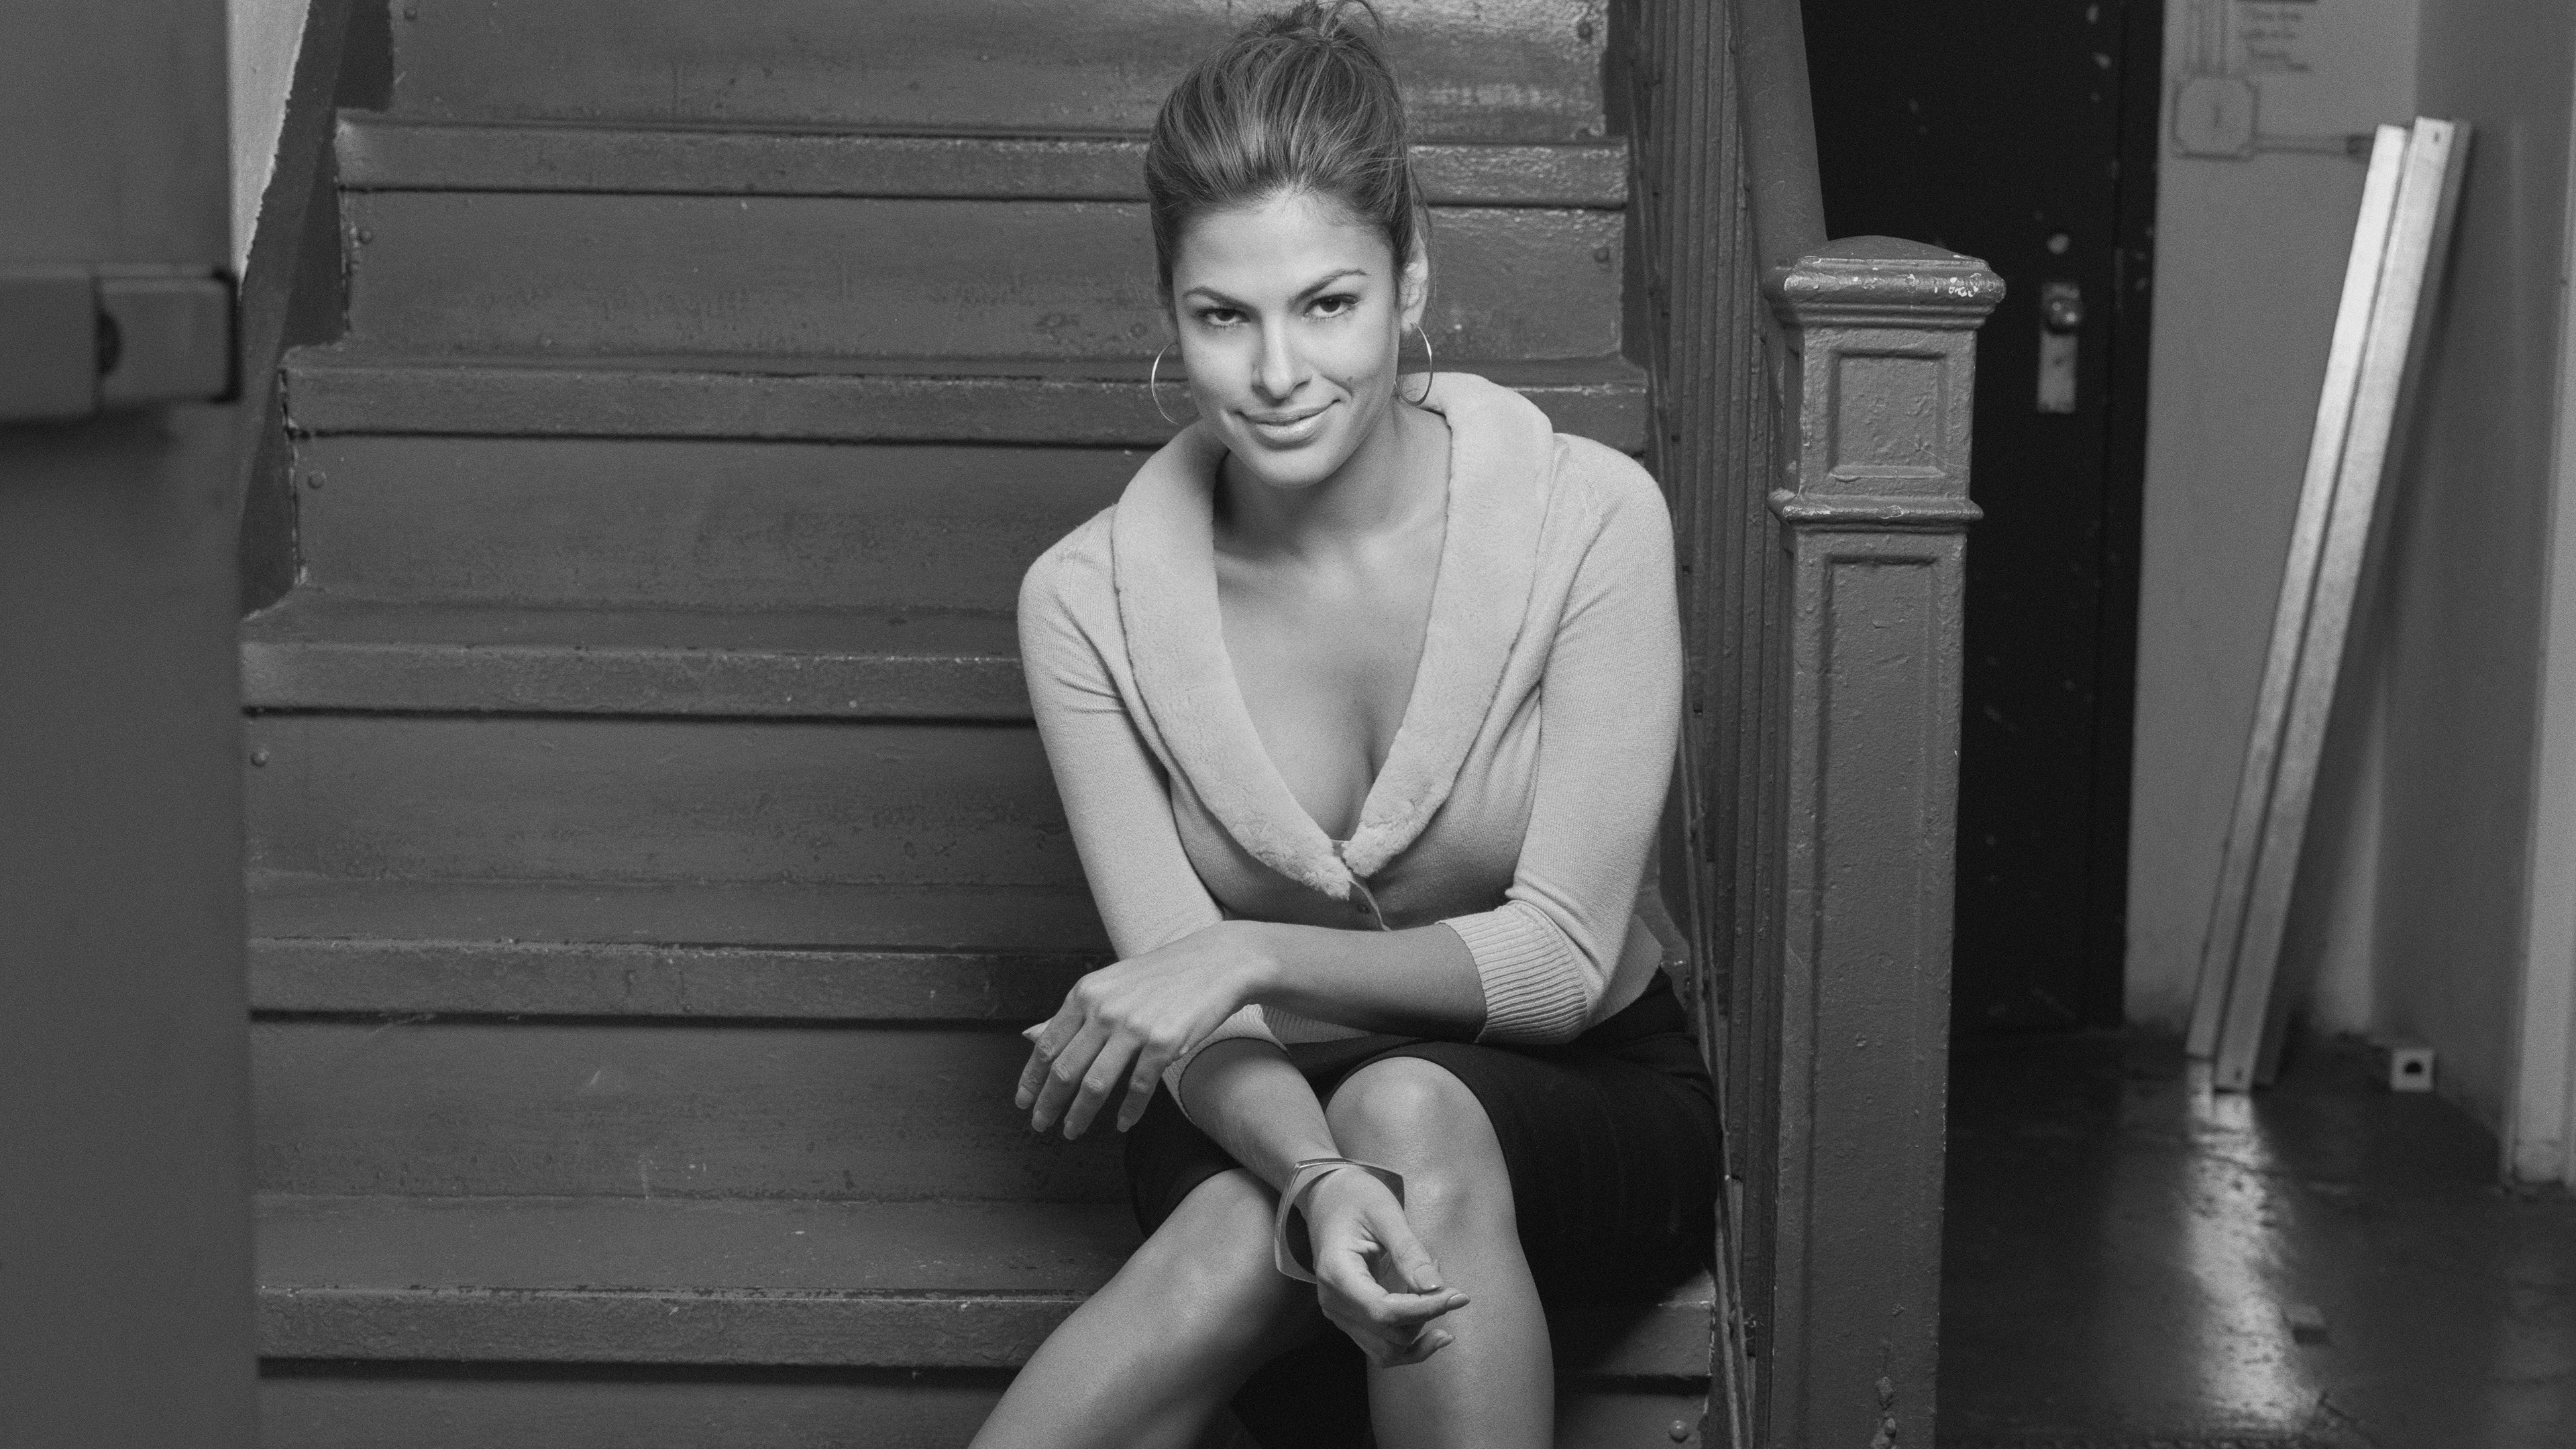 Eva Mendes Black and White for 3840 x 2160 Ultra HD resolution